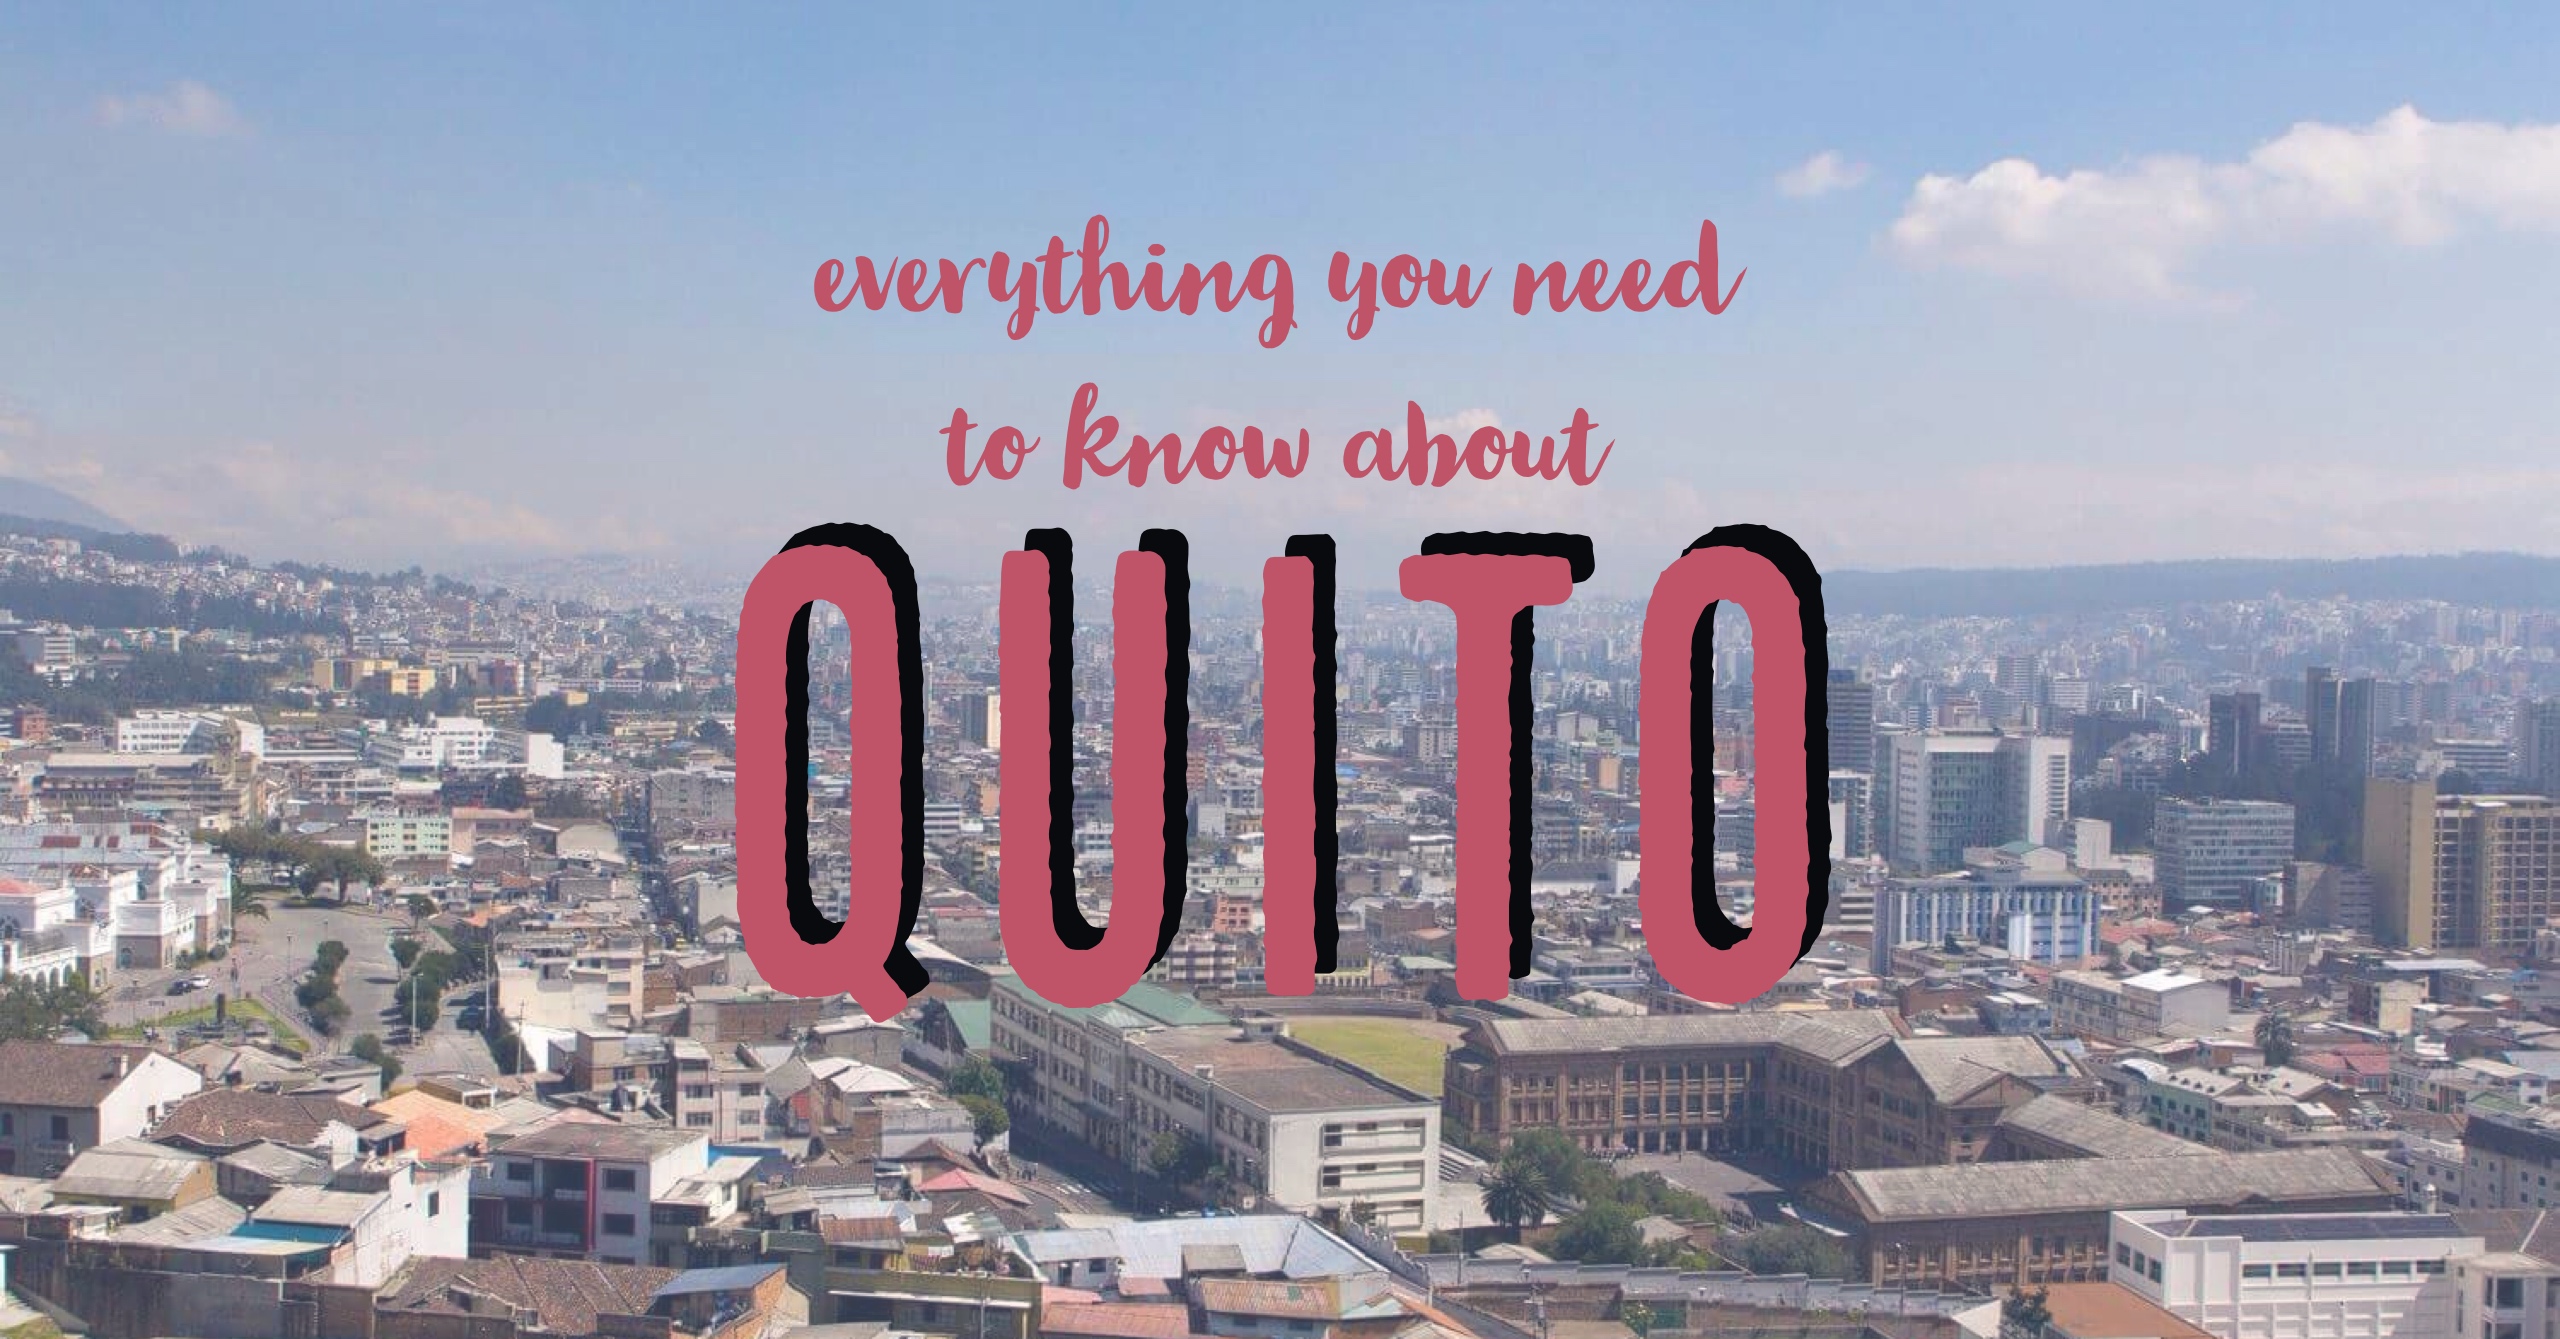 Everything you need to know about Quito, Ecuador | My Wandering Voyage Travel Blog